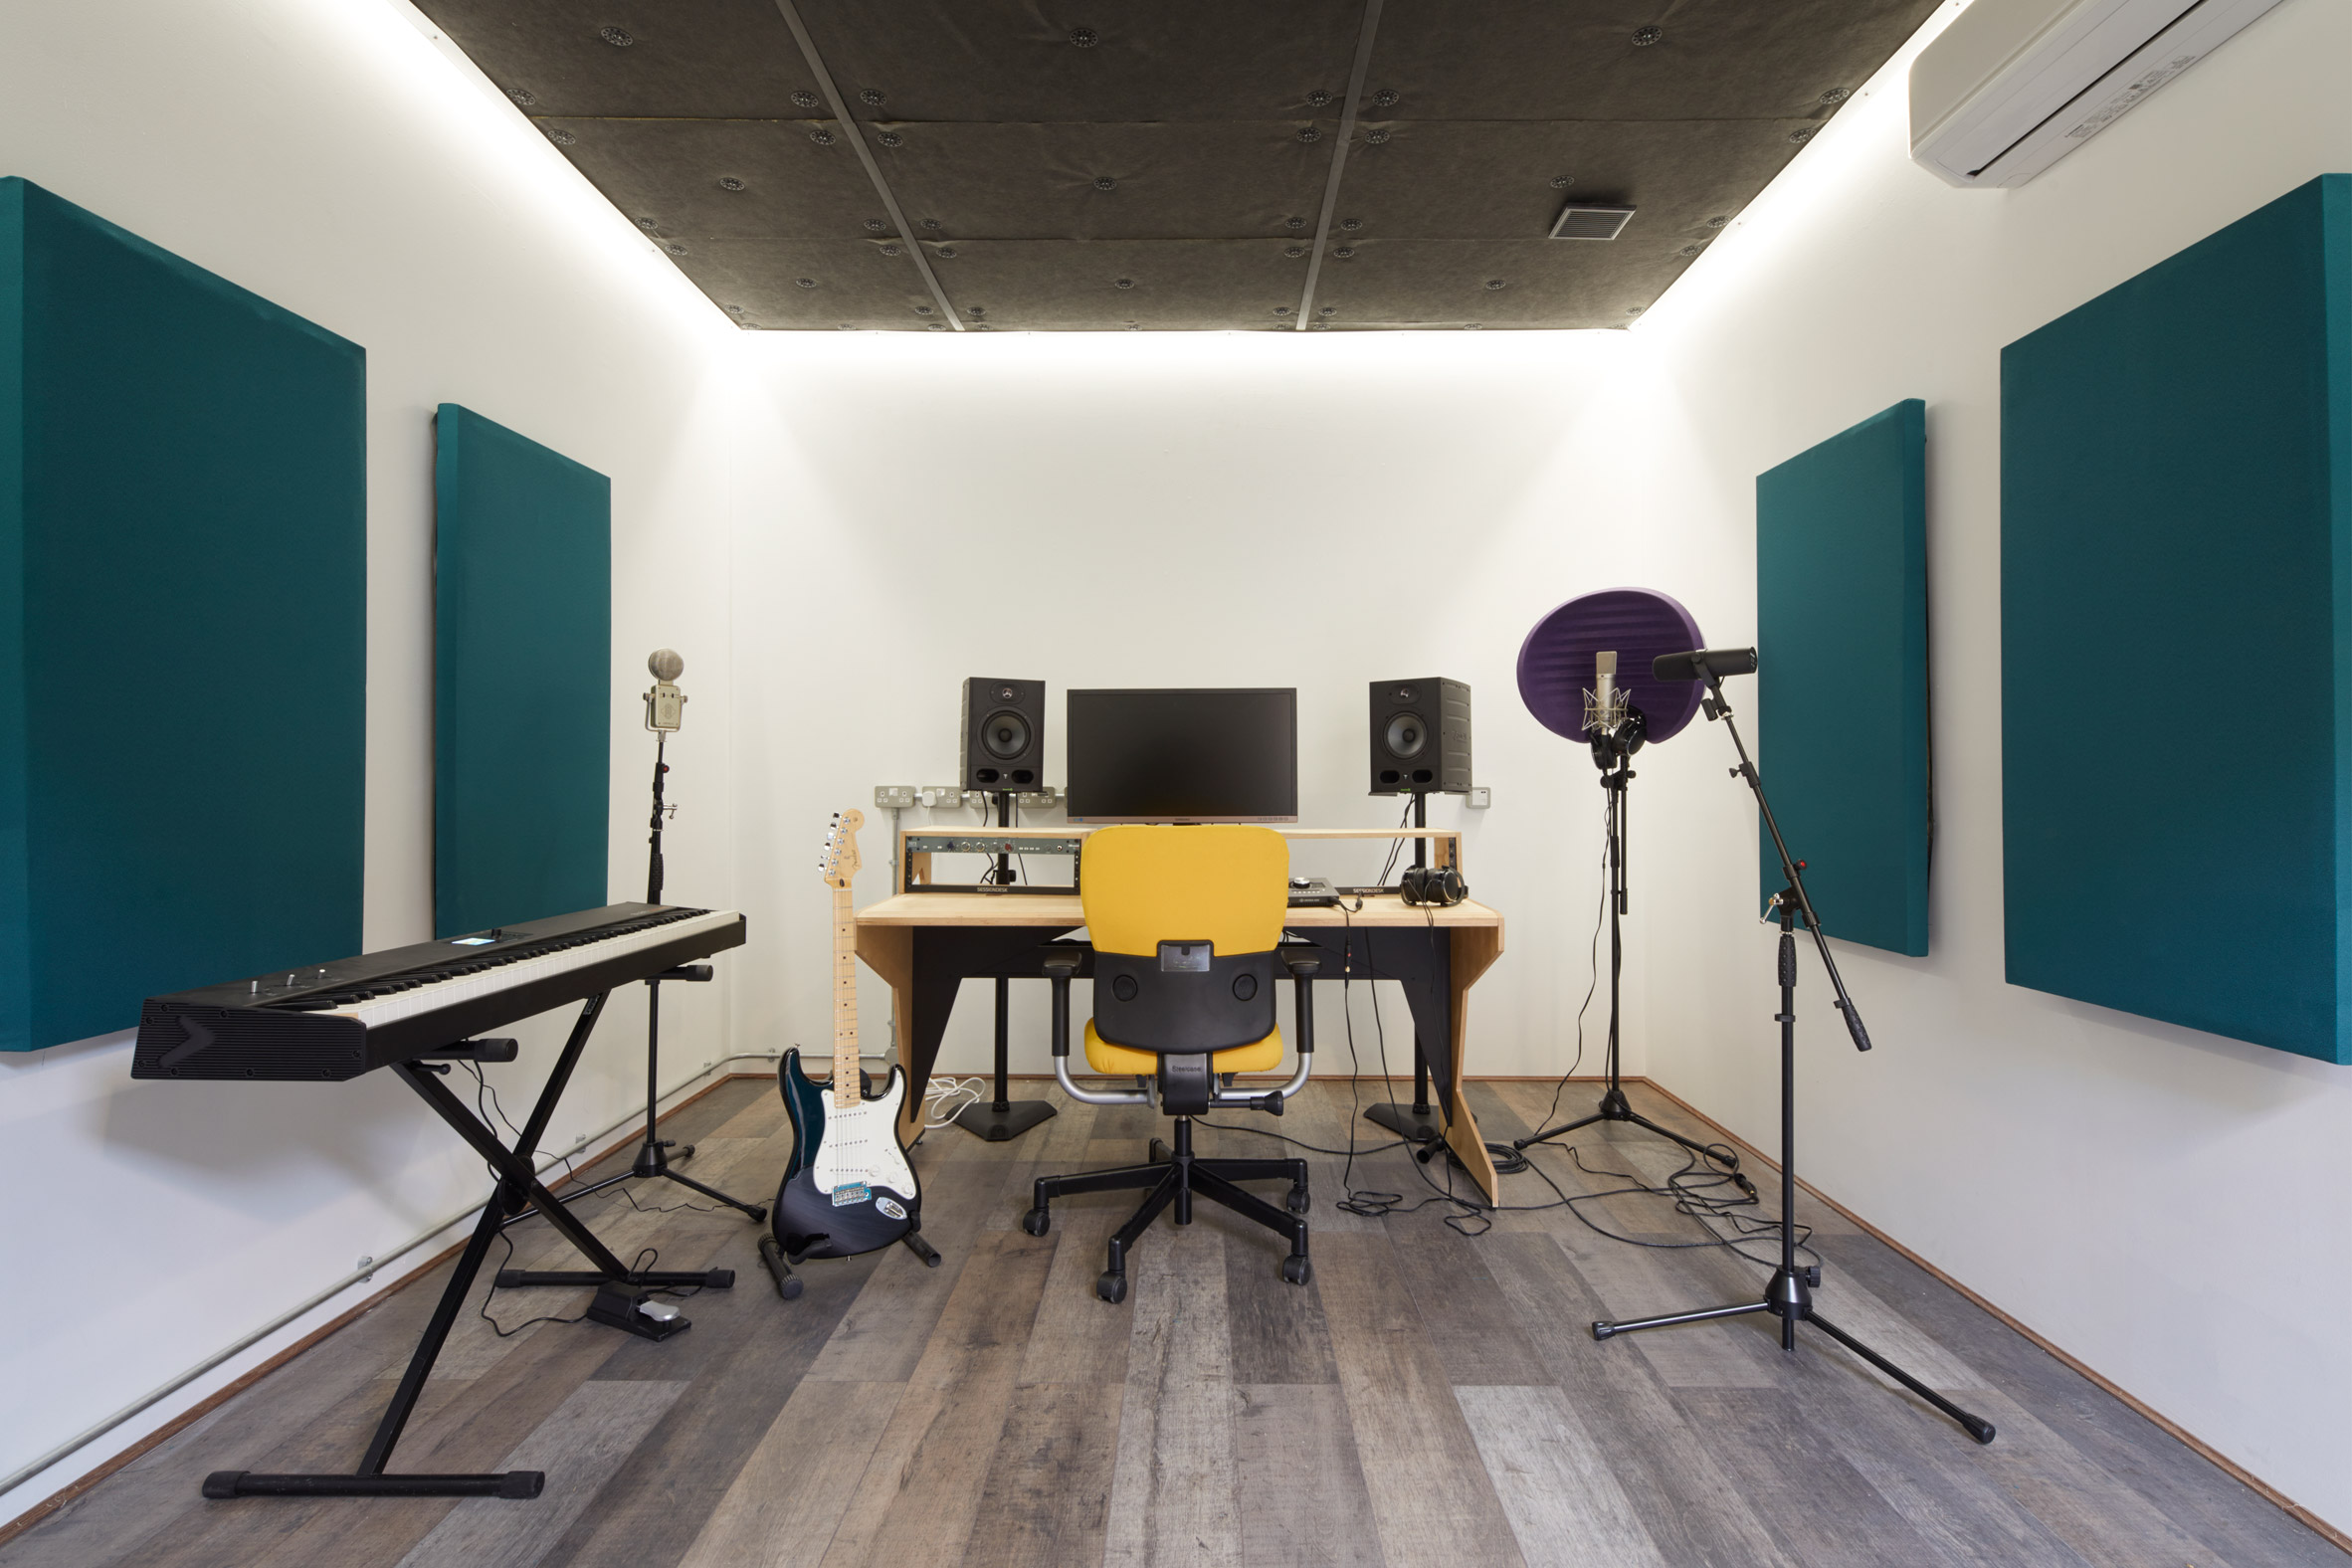 A white-walled music studio with teal acoustic panels